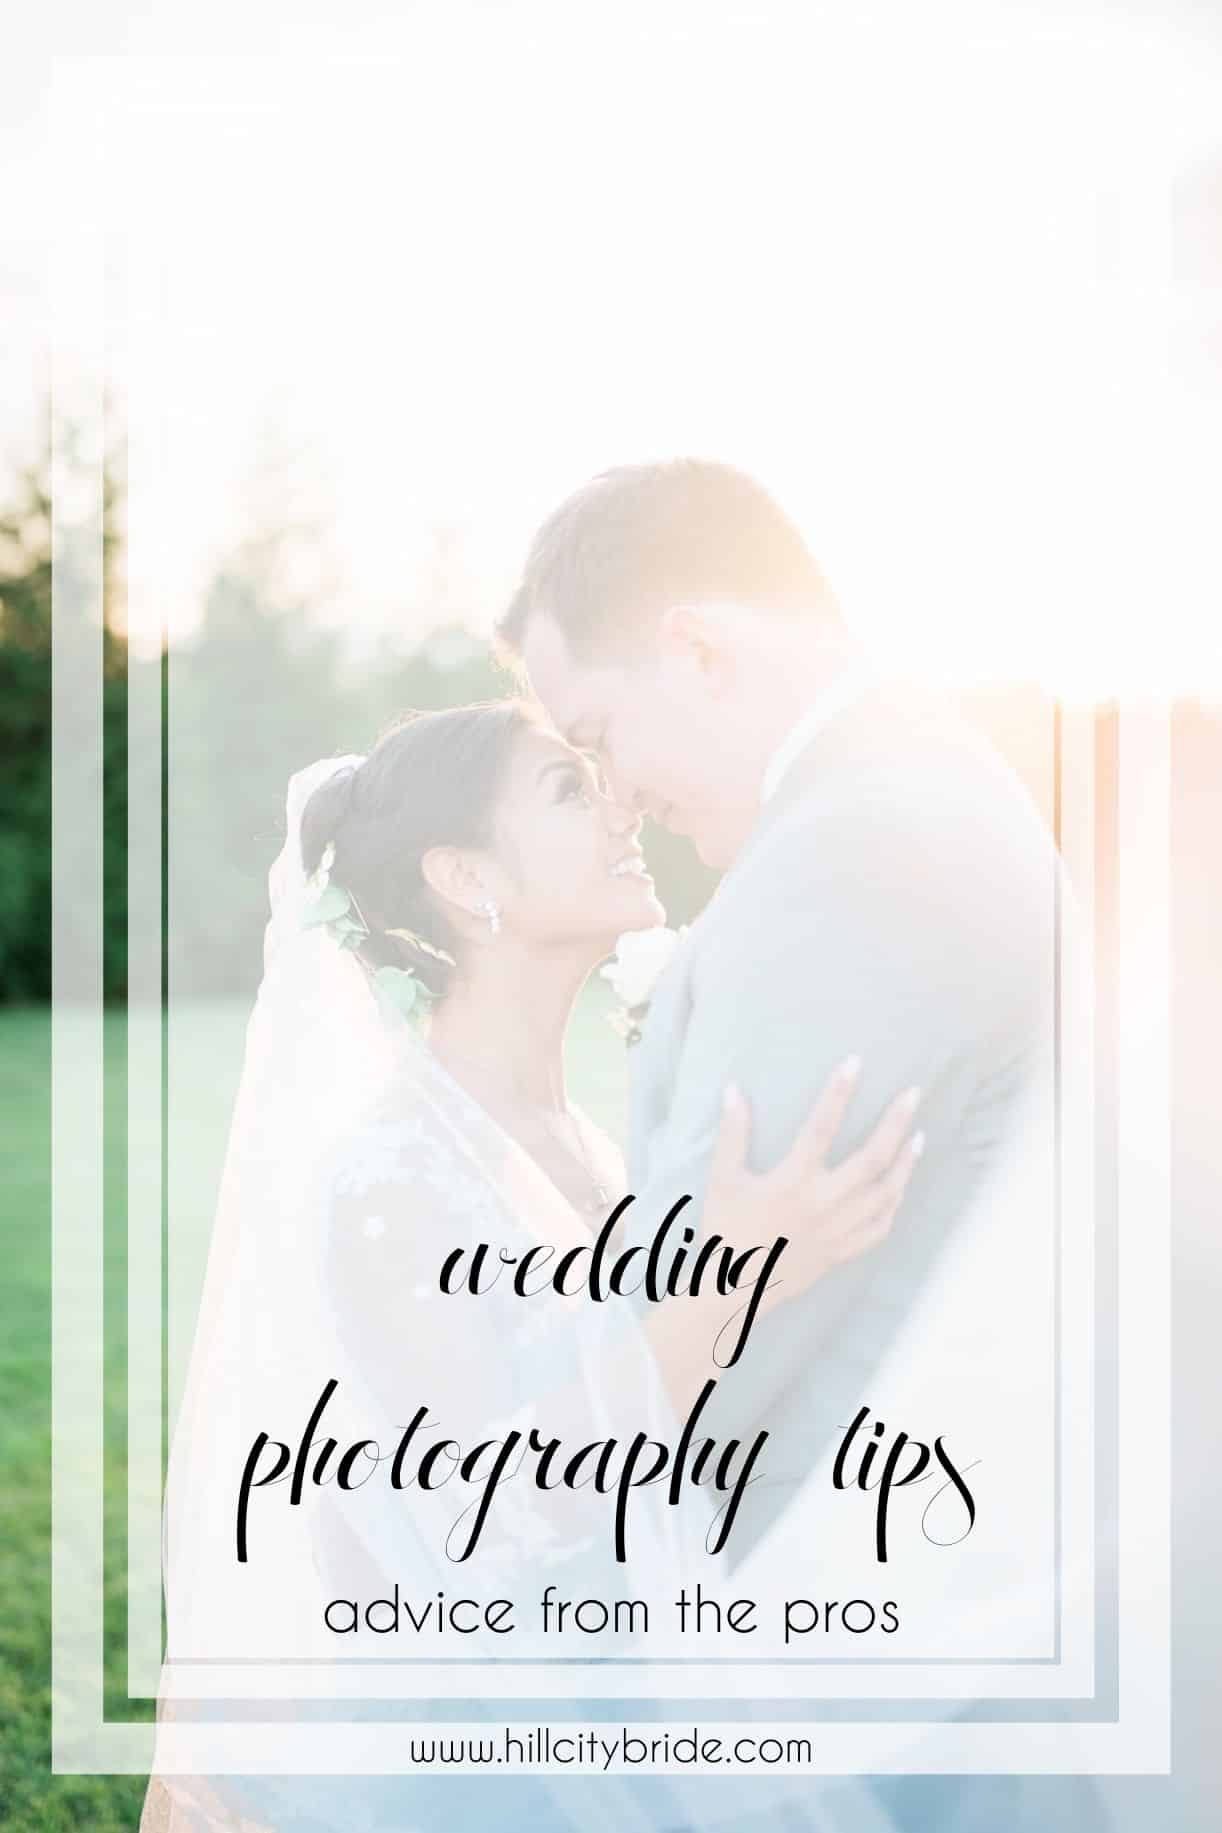 Wedding Photography Tips - Advice from the Pros | Hill City Bride